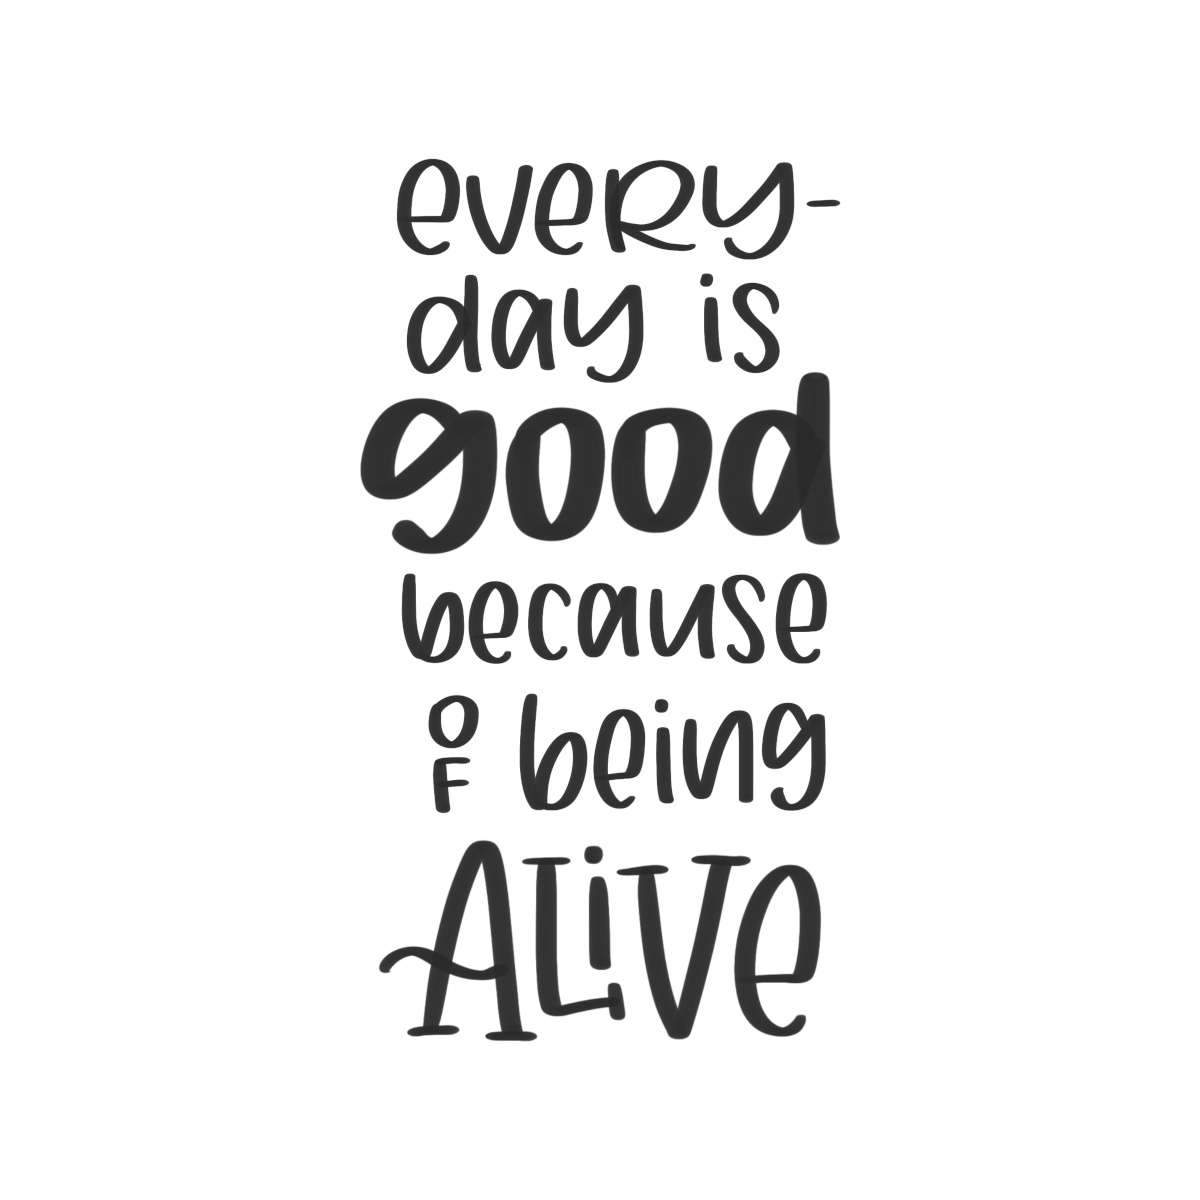 Everyday is good because of being alive.